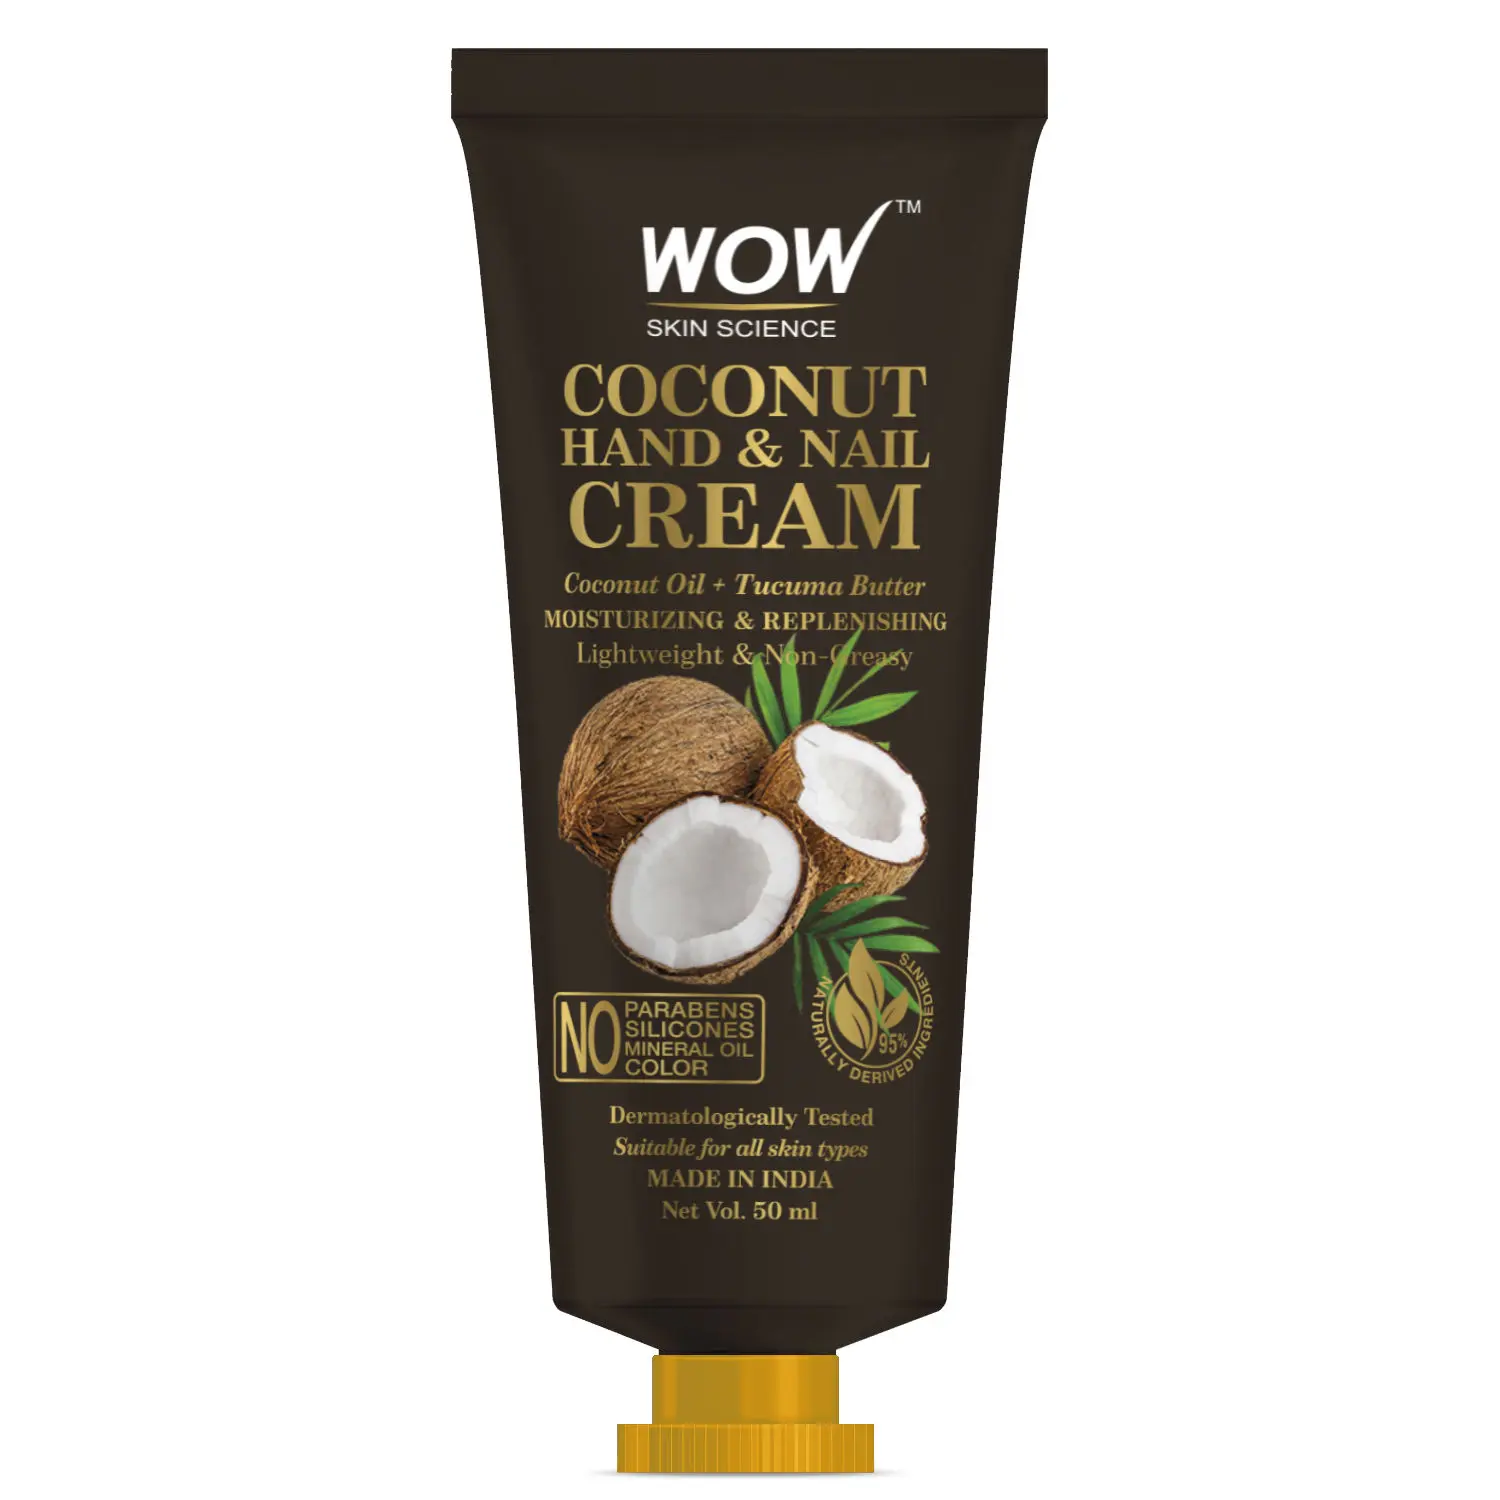 WOW Skin Science Coconut Hand & Nail Cream - Moisturizing & Replenishing - Lightweight & Non-Greasy - Quick Absorb - for All Skin Types - No Parabens, Silicones, Mineral Oil & Color - 50mL